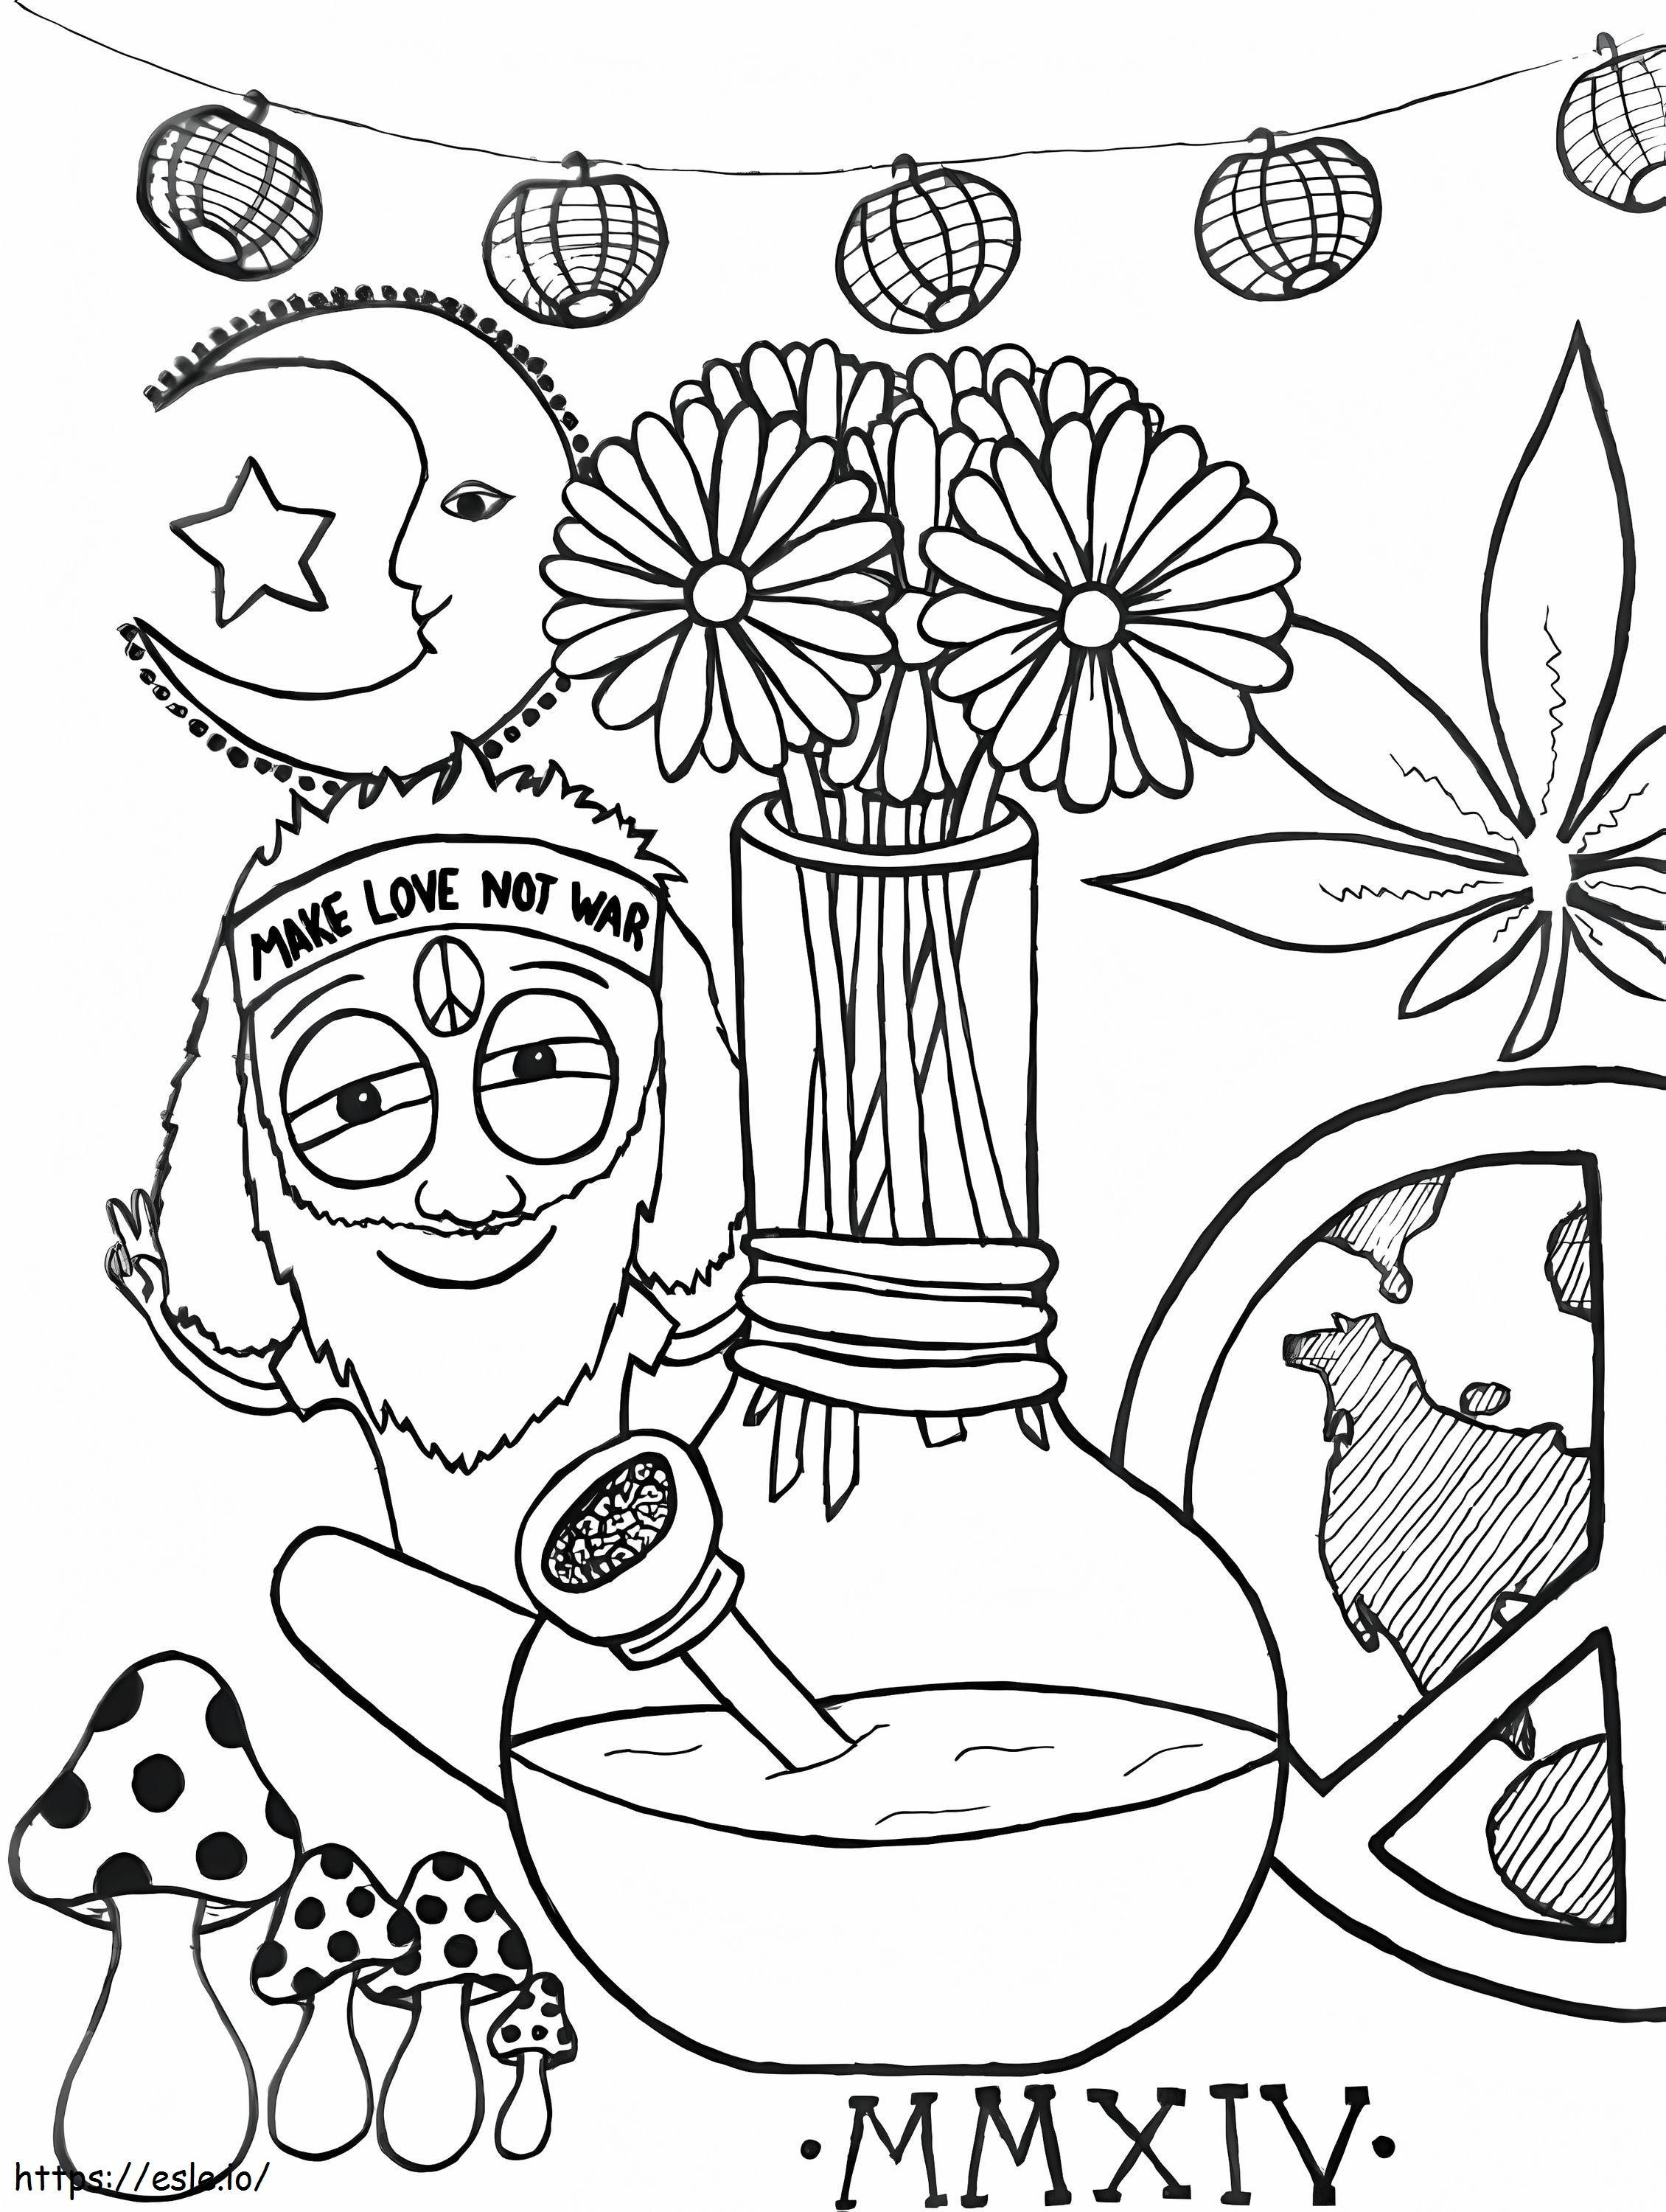 Stoner 10 coloring page